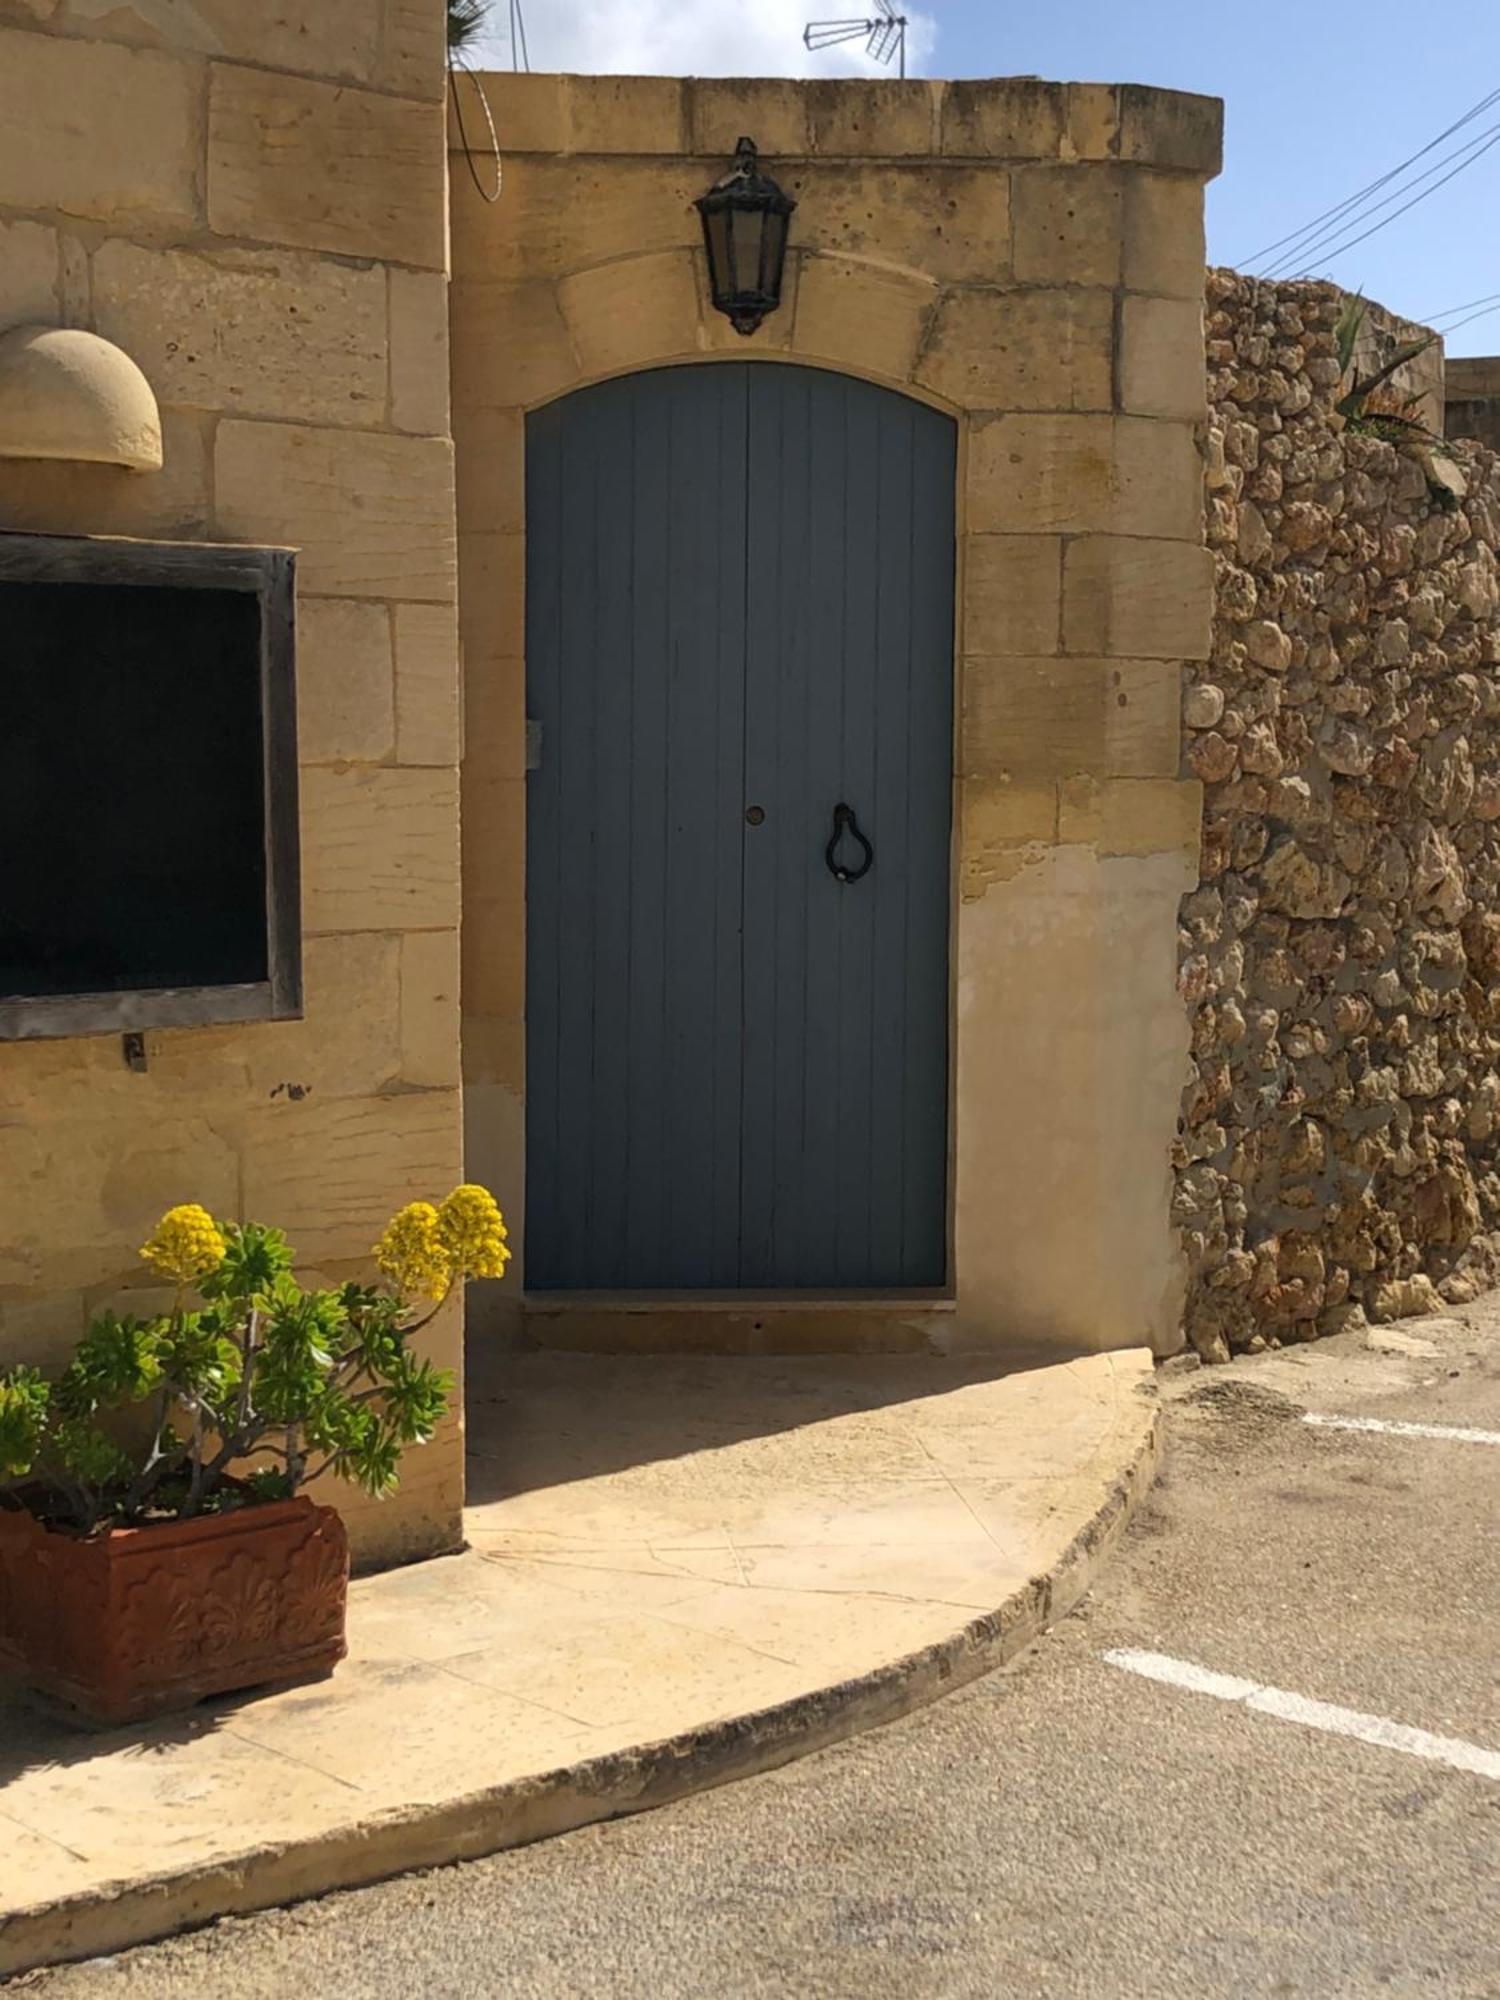 Gozo Silence Bed & Breakfast Gharb  Exterior photo